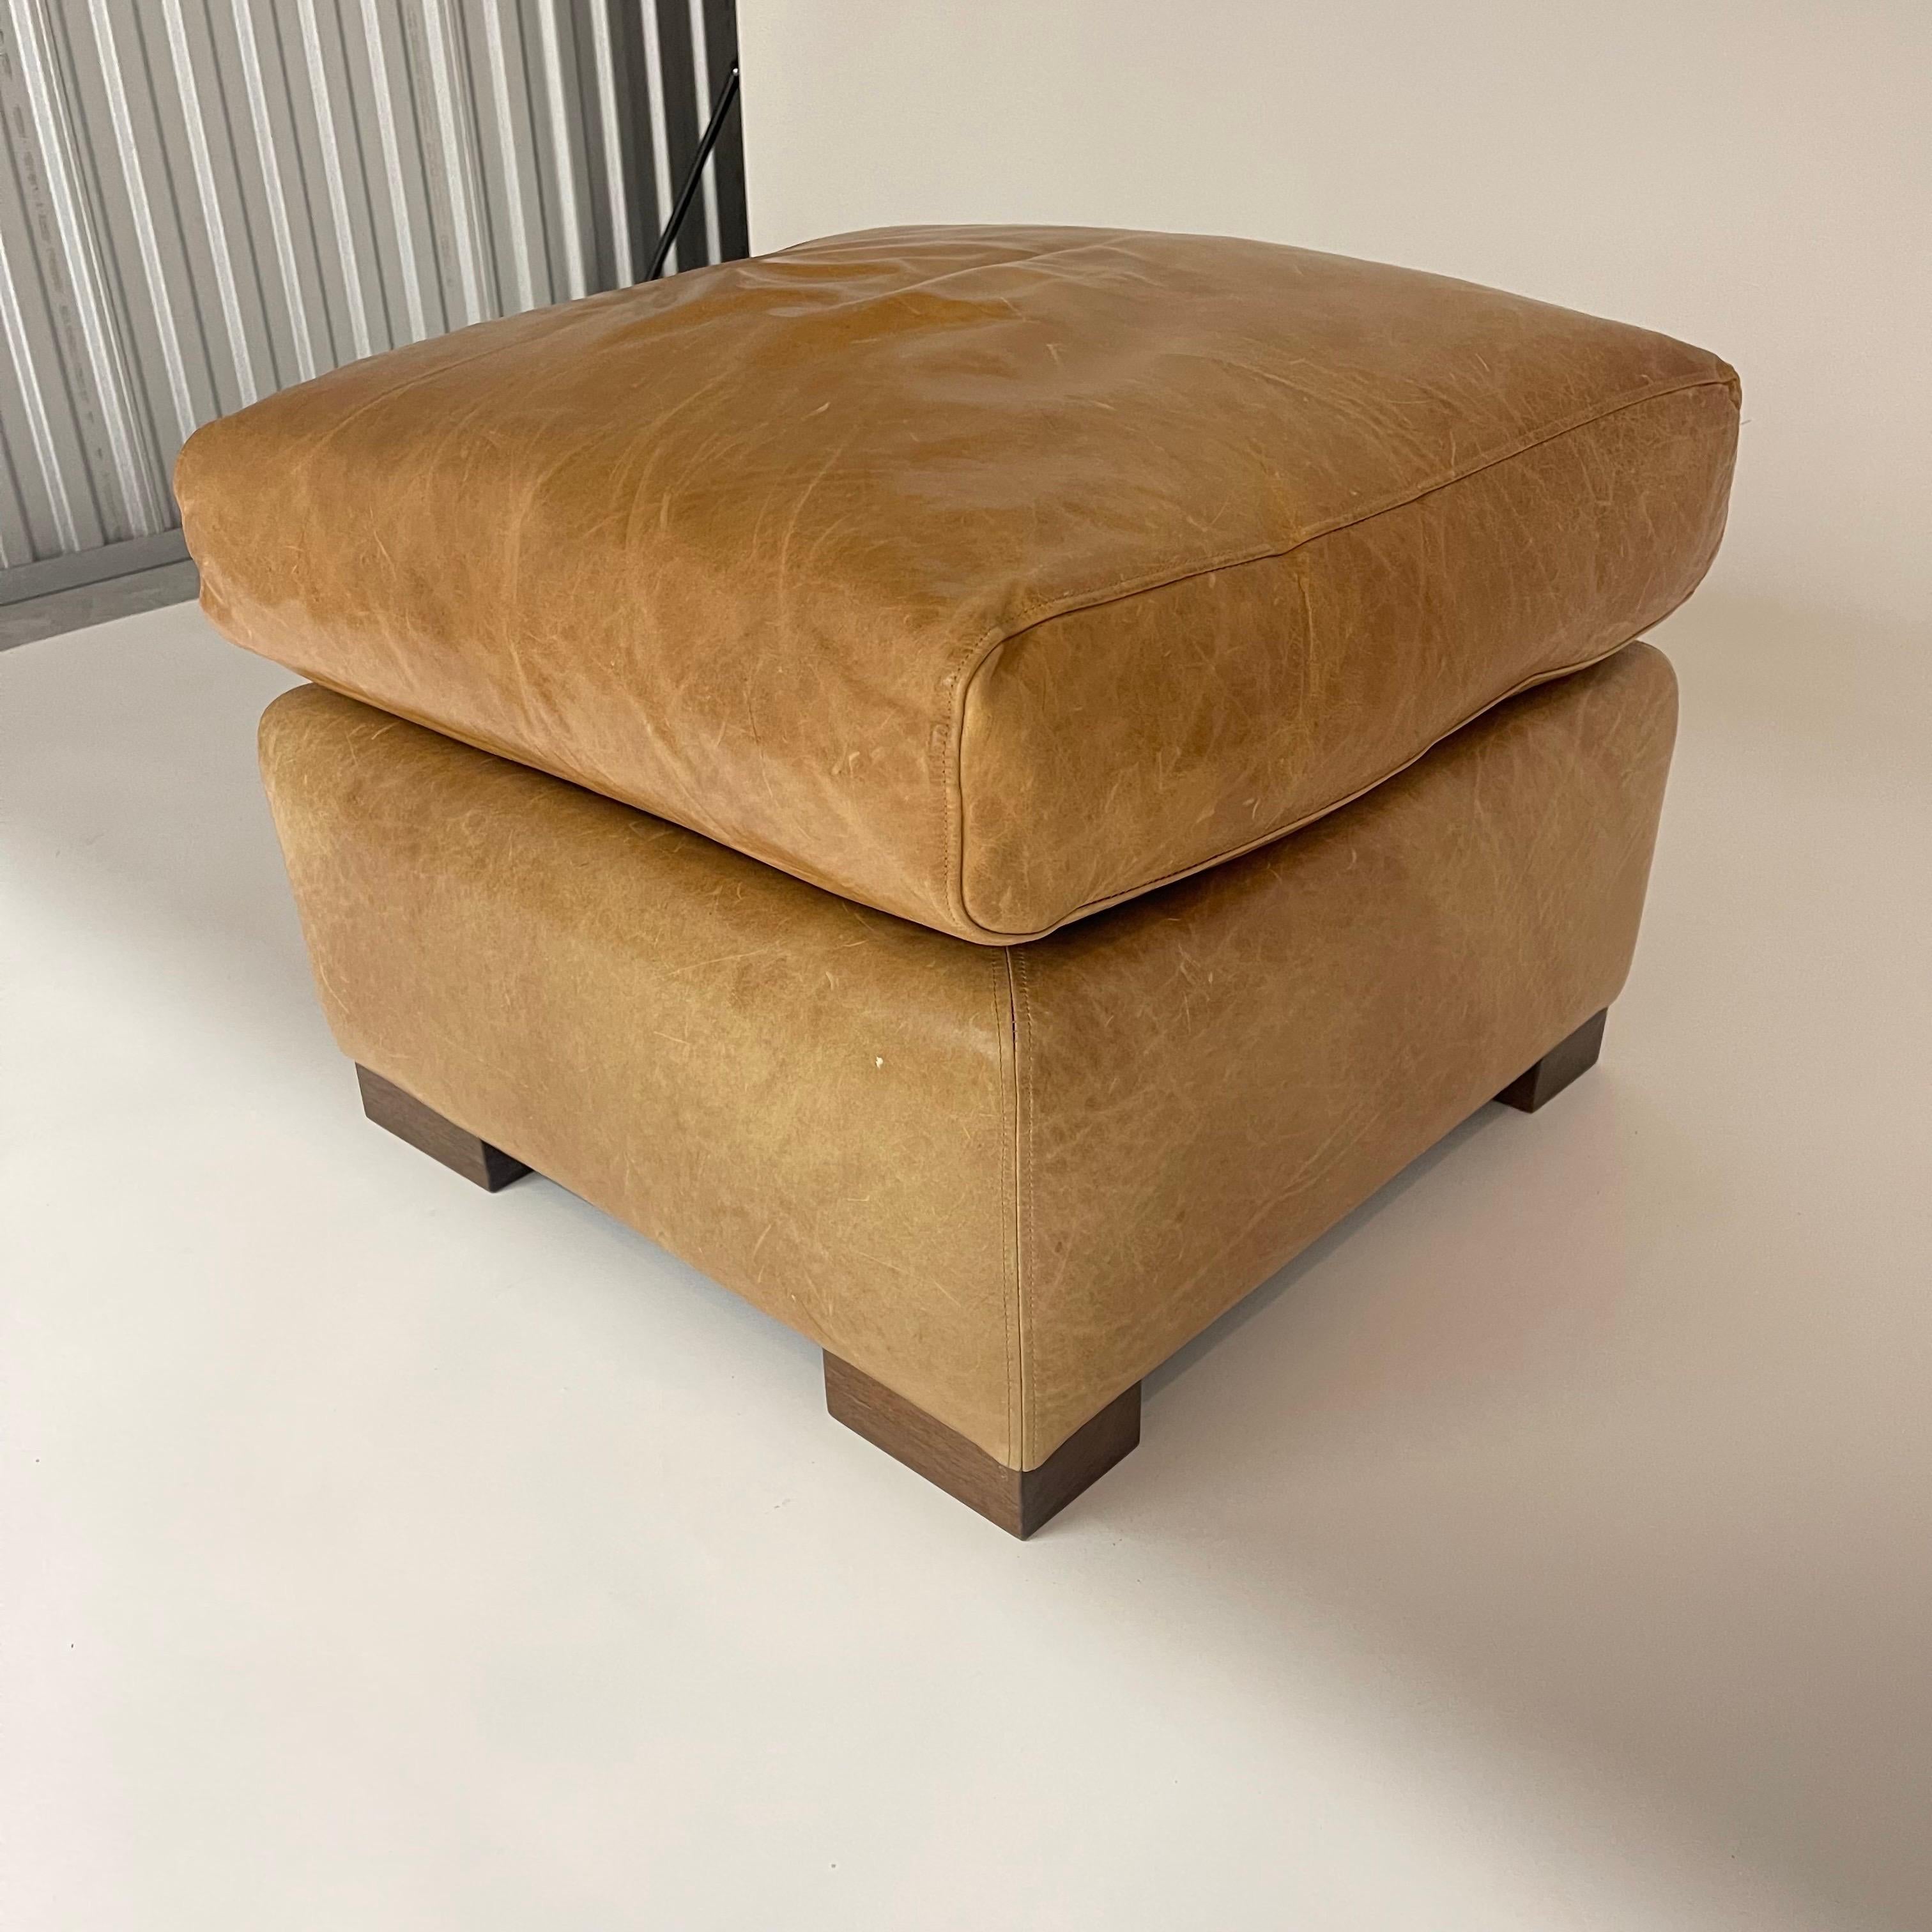 Classic Tuxedo cube ottoman or footstool rendered in cognac leather upholstery with a down filled foam cushion and walnut feet, made in Montreal Canada, 2000s